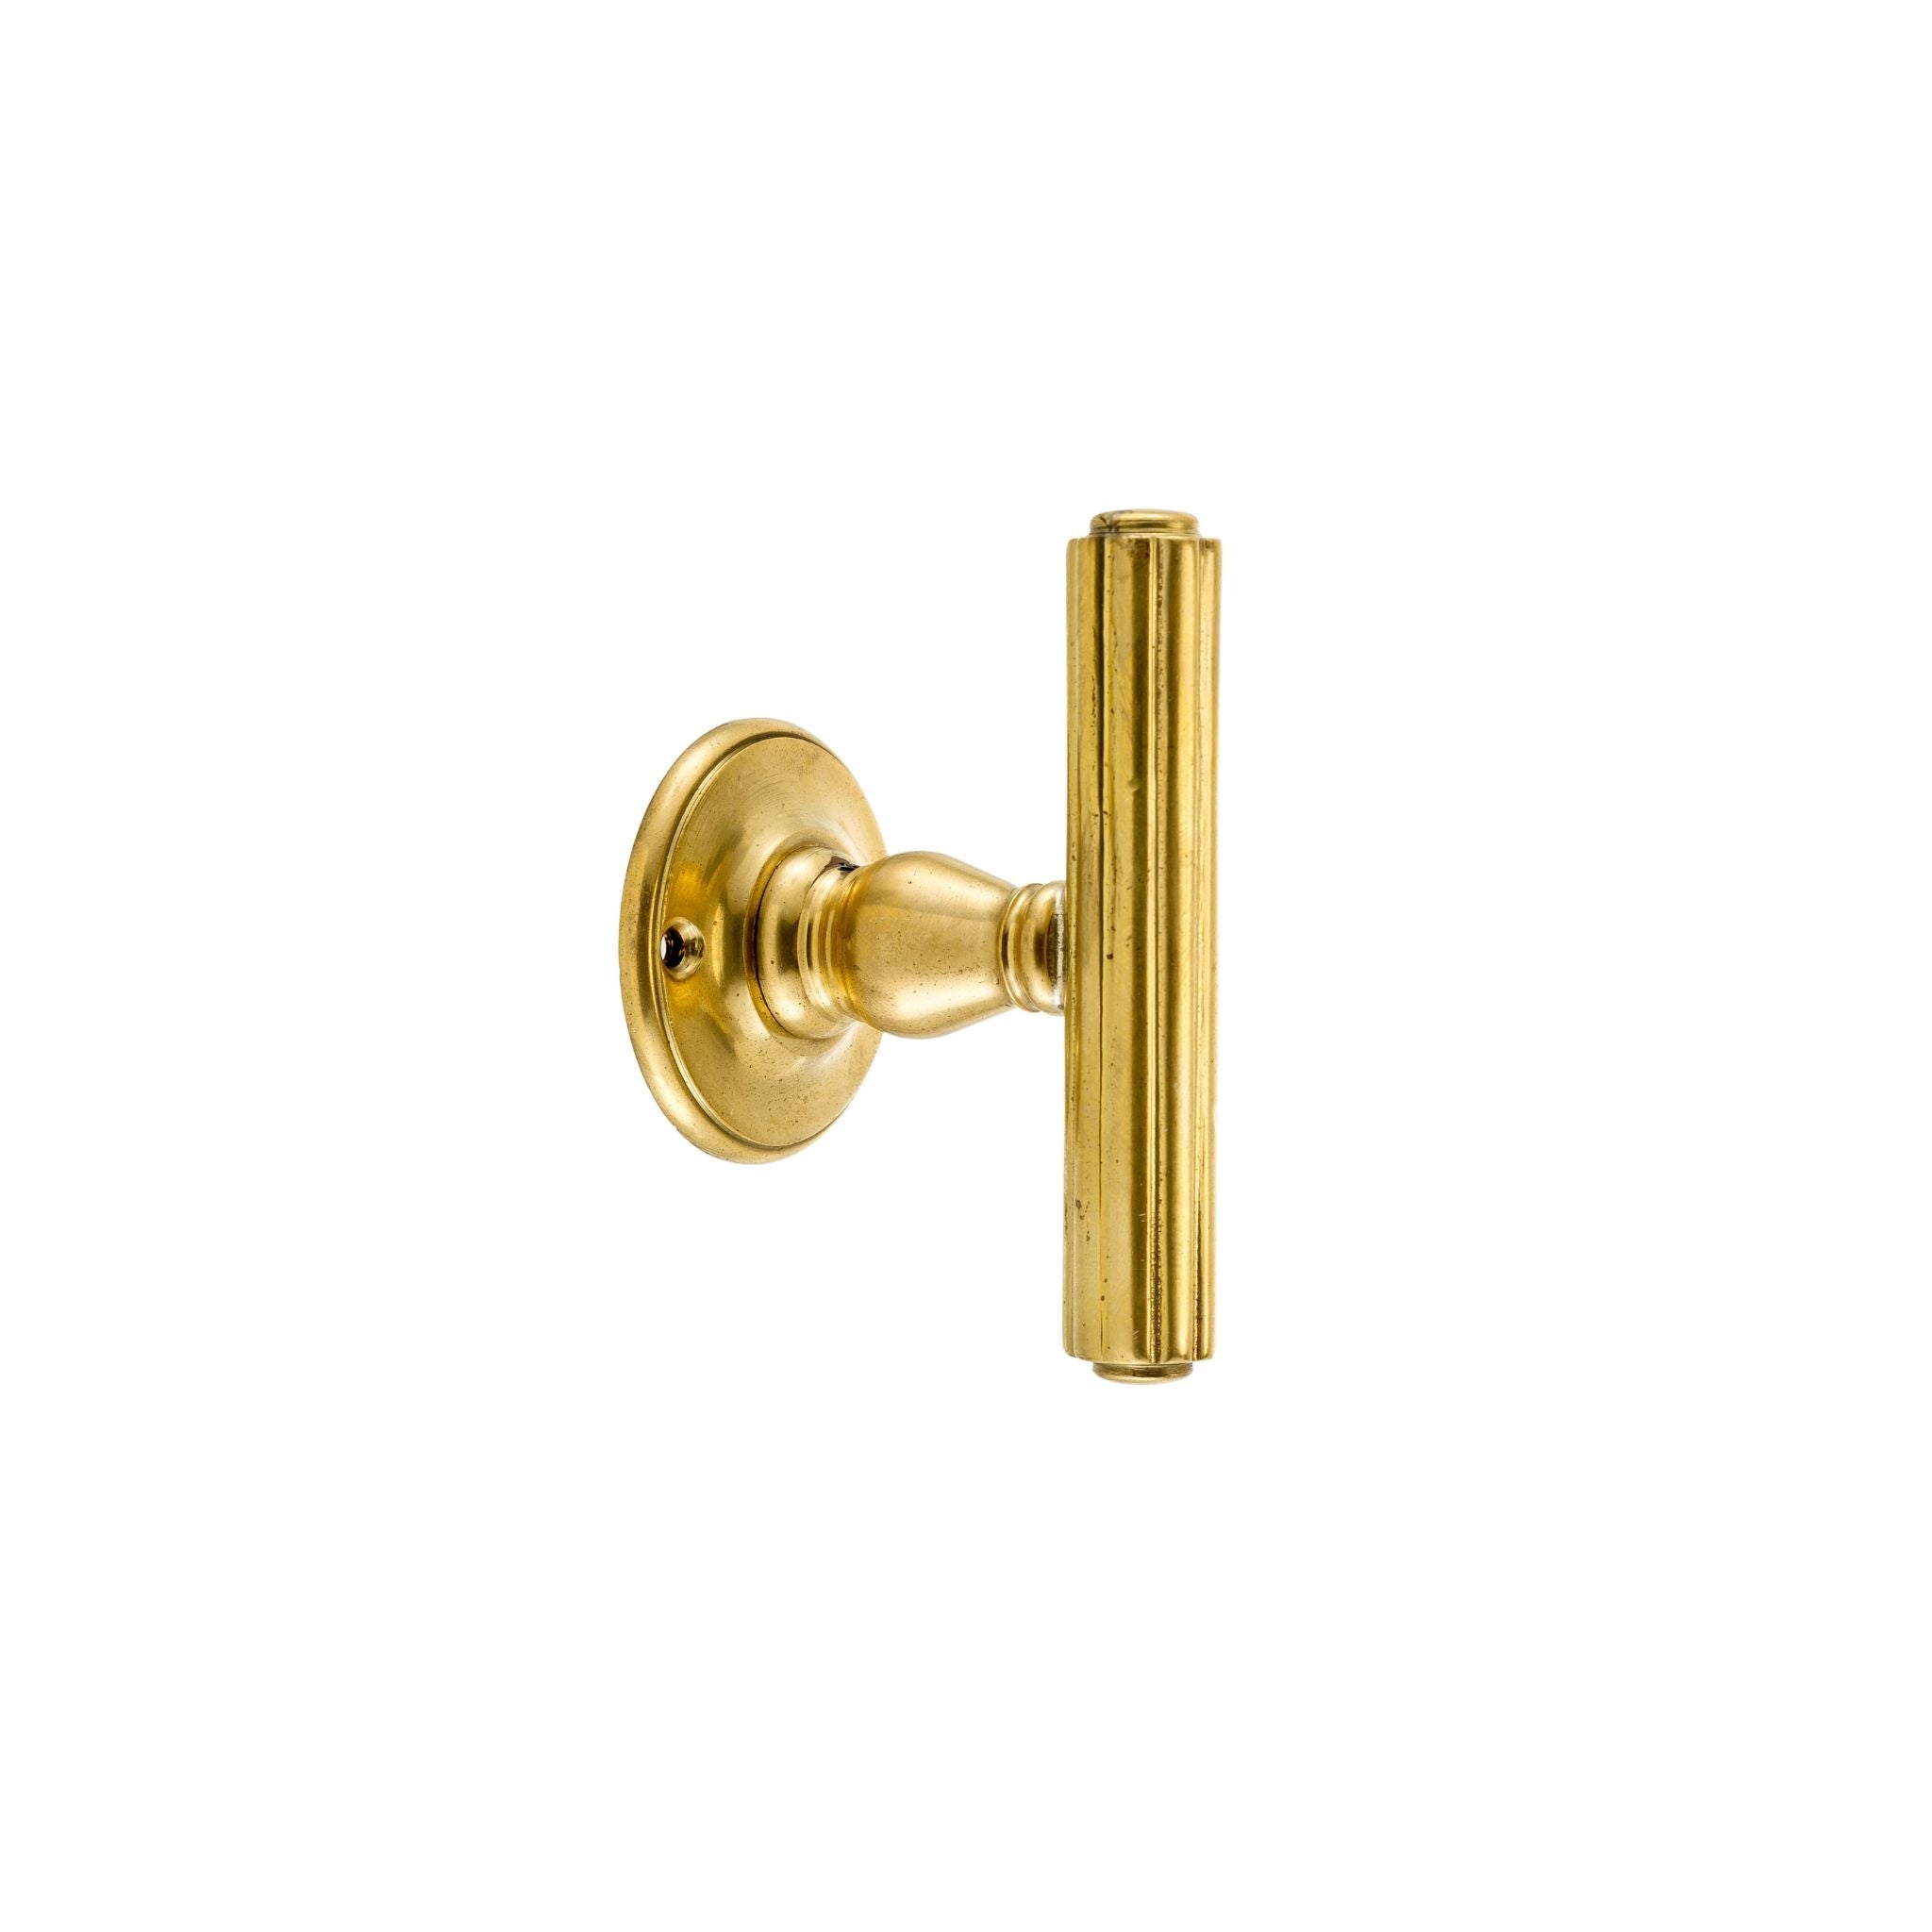 Novecento brass tubolar window handle with grooves - ilbronzetto